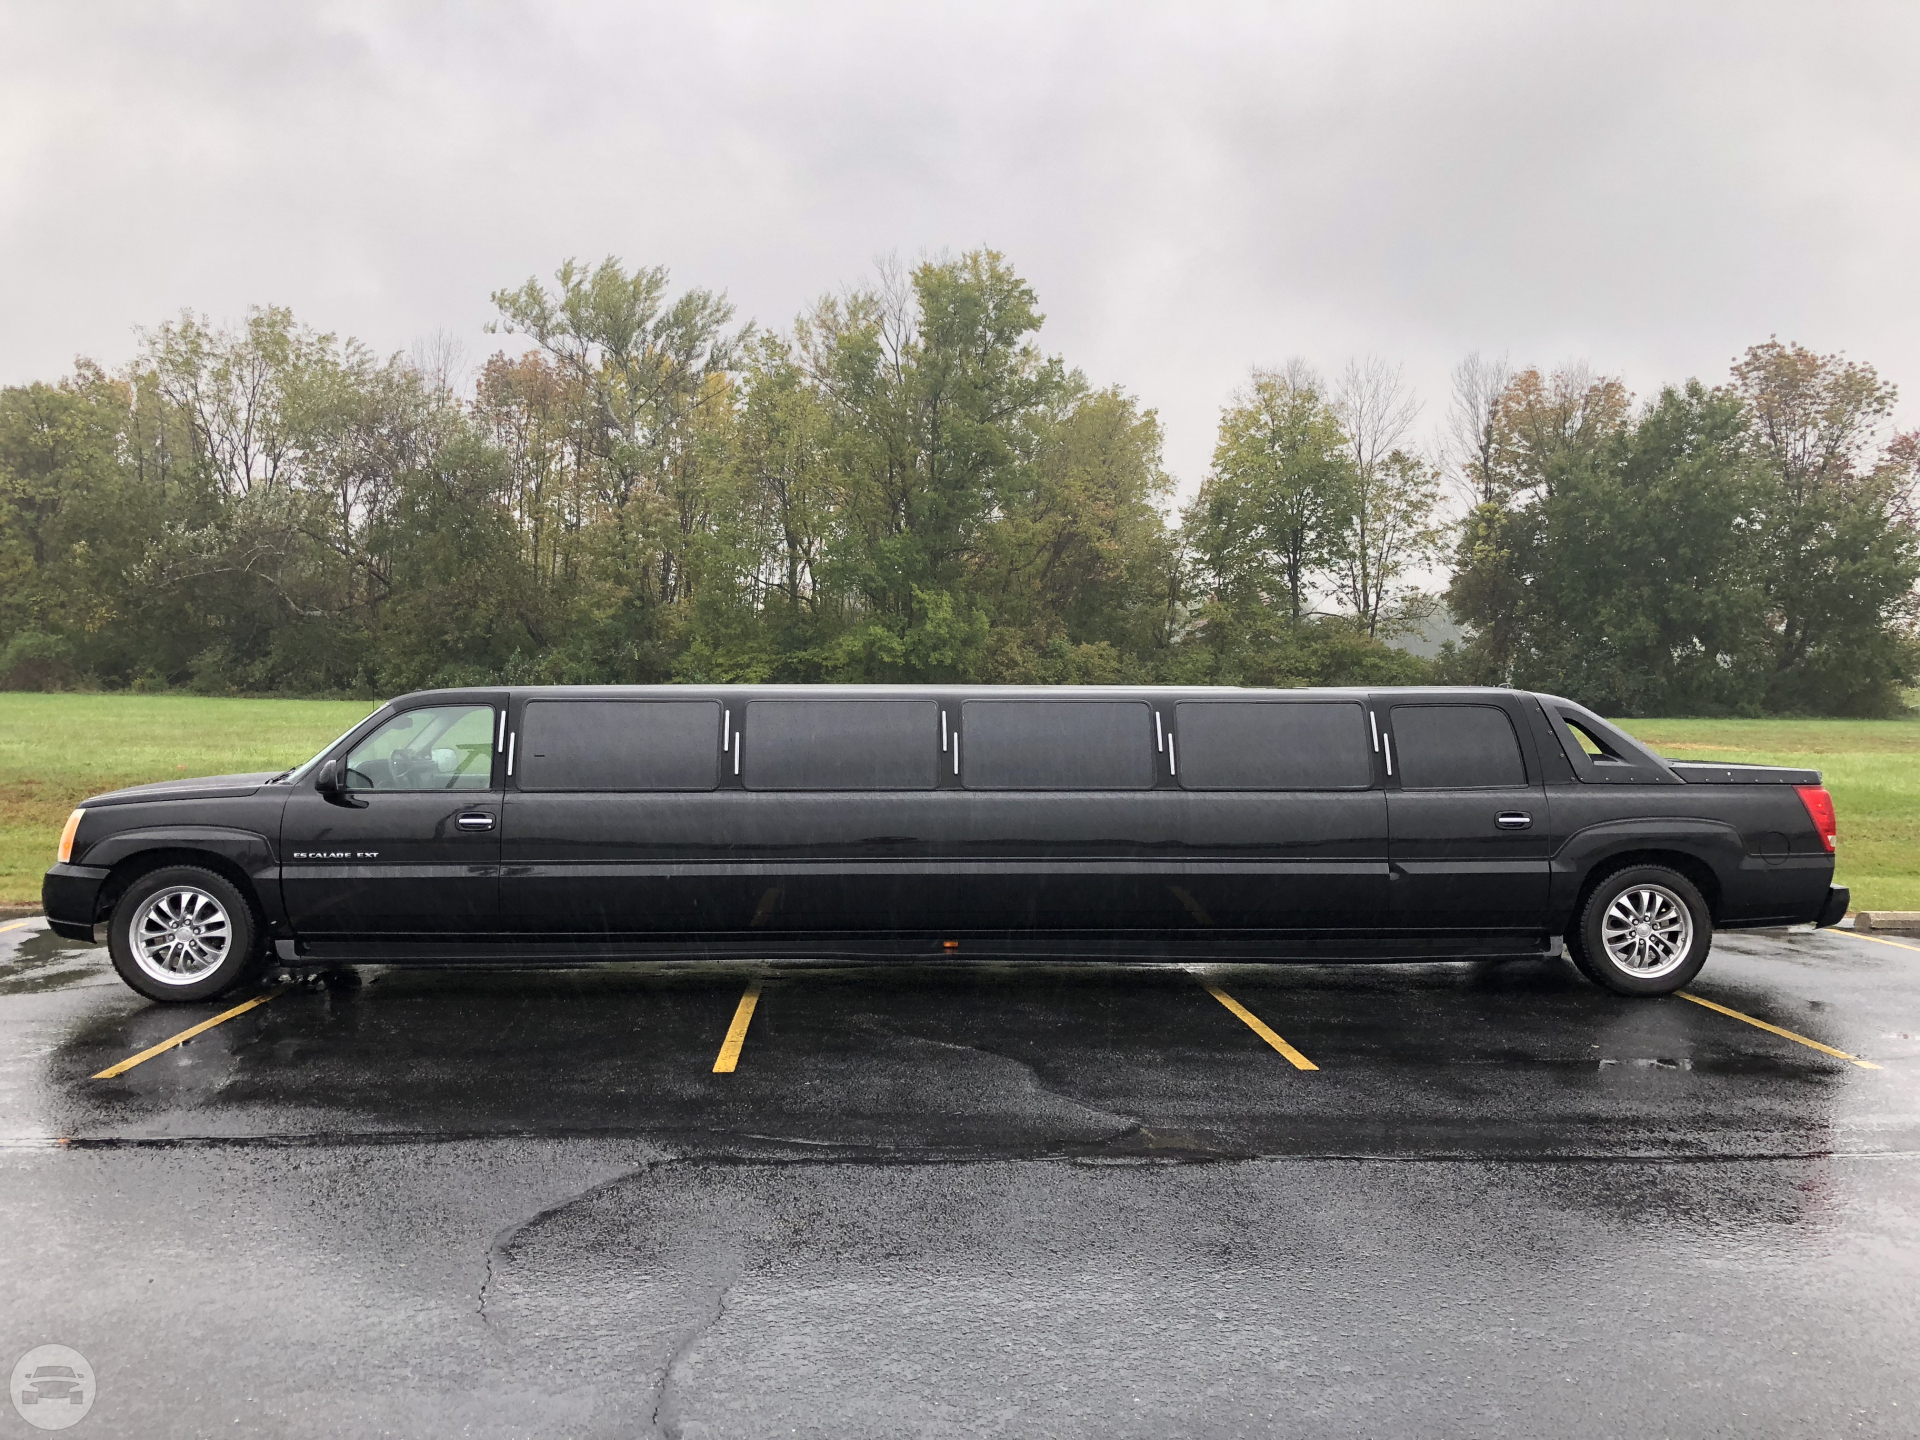 Cadillac Escalade EXT Ultra Stretch SUV Limousine
Limo /
Carmel, IN

 / Hourly $0.00
